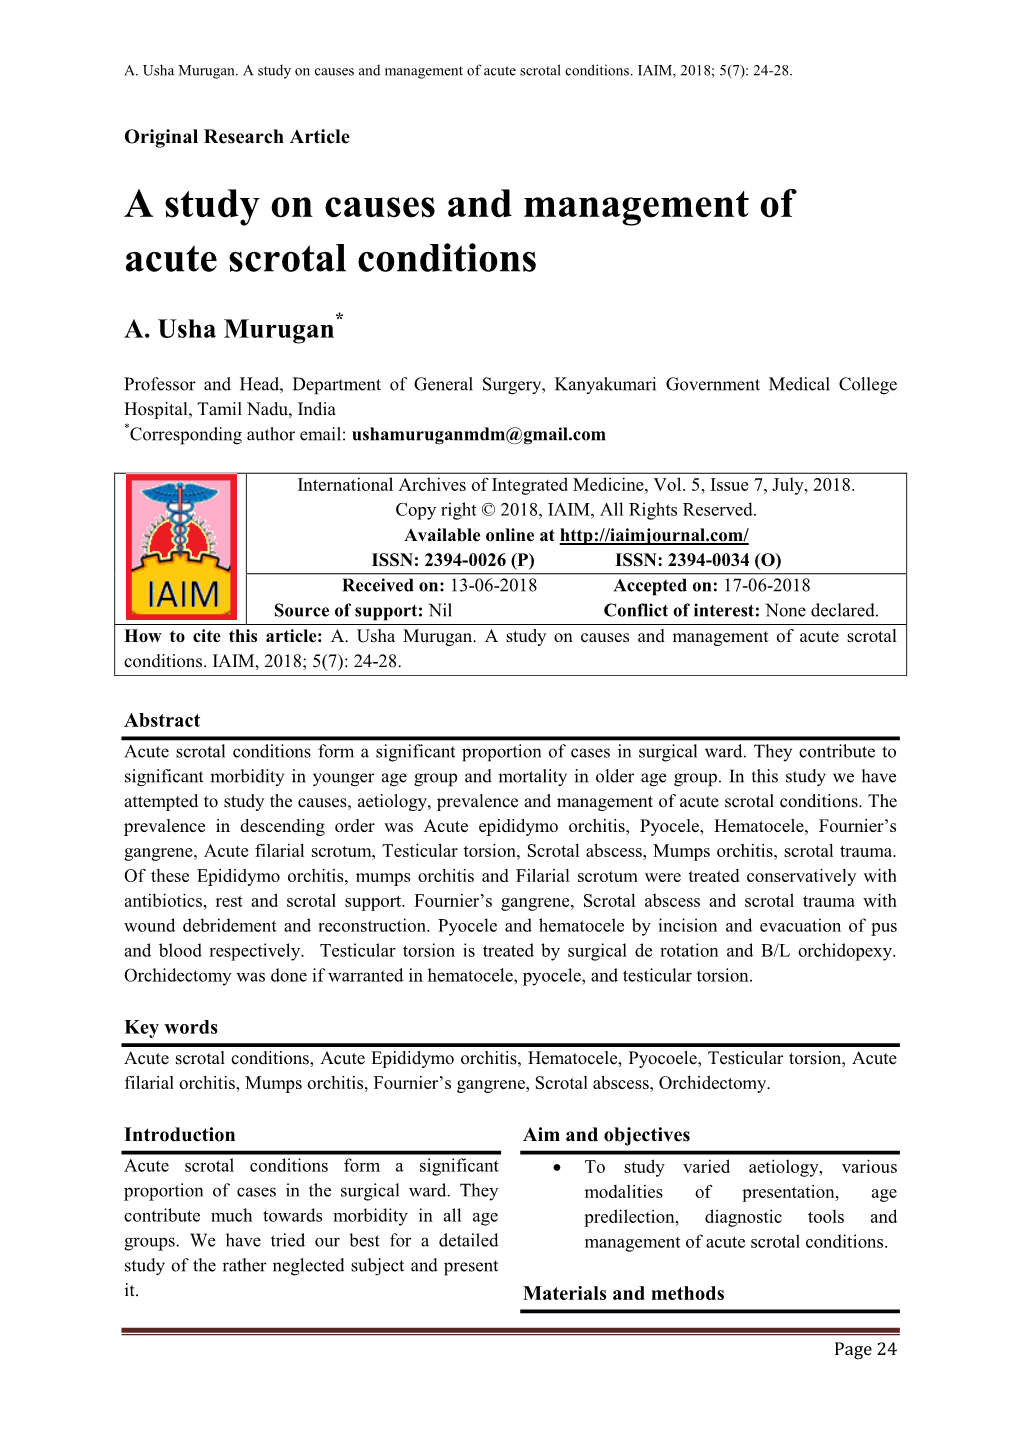 A Study on Causes and Management of Acute Scrotal Conditions